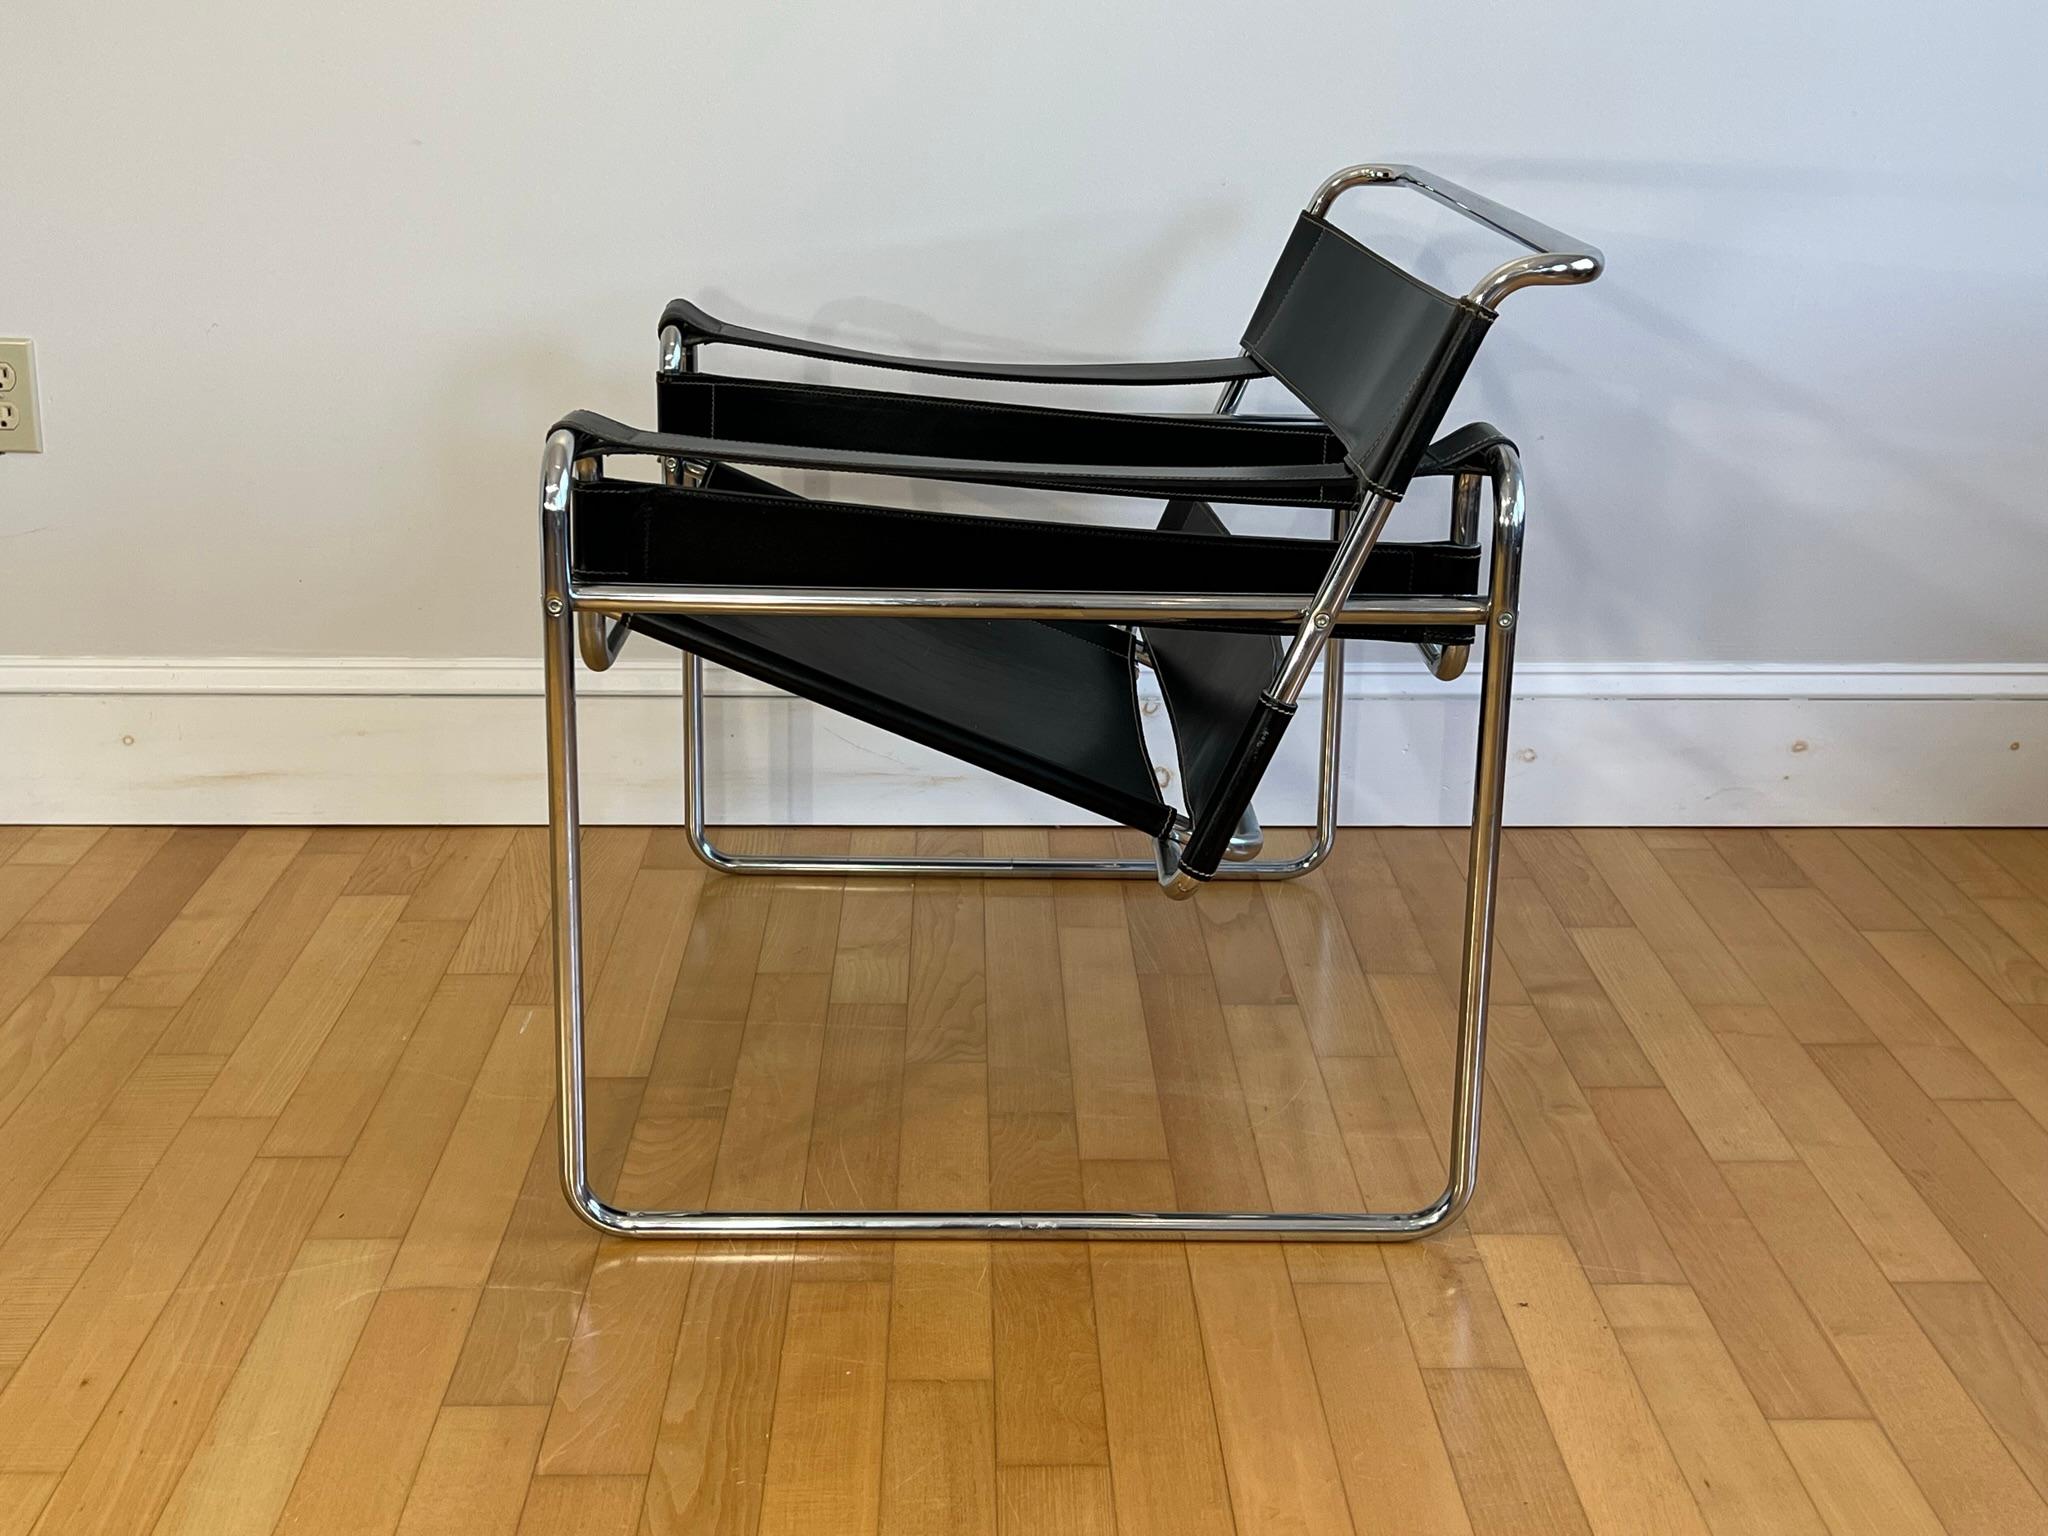 The Wassily chair, also known as the B3 Chair, designed by Marcel Breuer in 1925 while he was working at the Bauhaus. 

Inspired by the curving handlebars of the Adler bicycle, the Wassily’s chrome-finished tubular steel frame is seamless in its